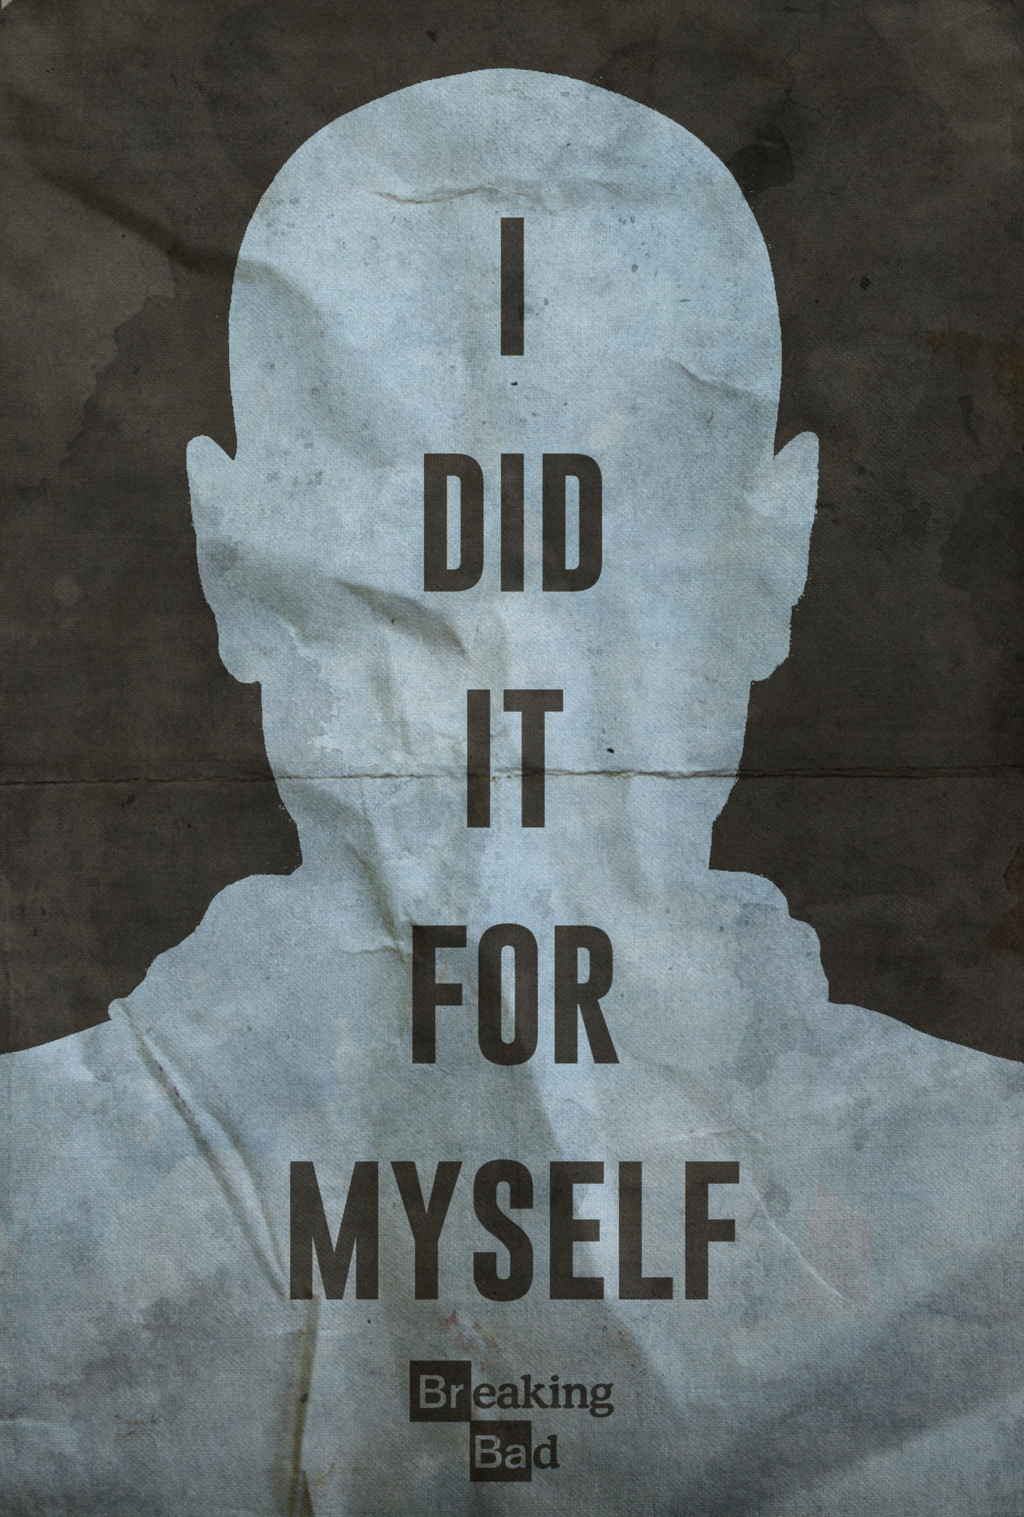 Breaking Bad Poster by disgorgeapocalypse. Breaking bad poster, Breaking bad, Breaking bad quotes